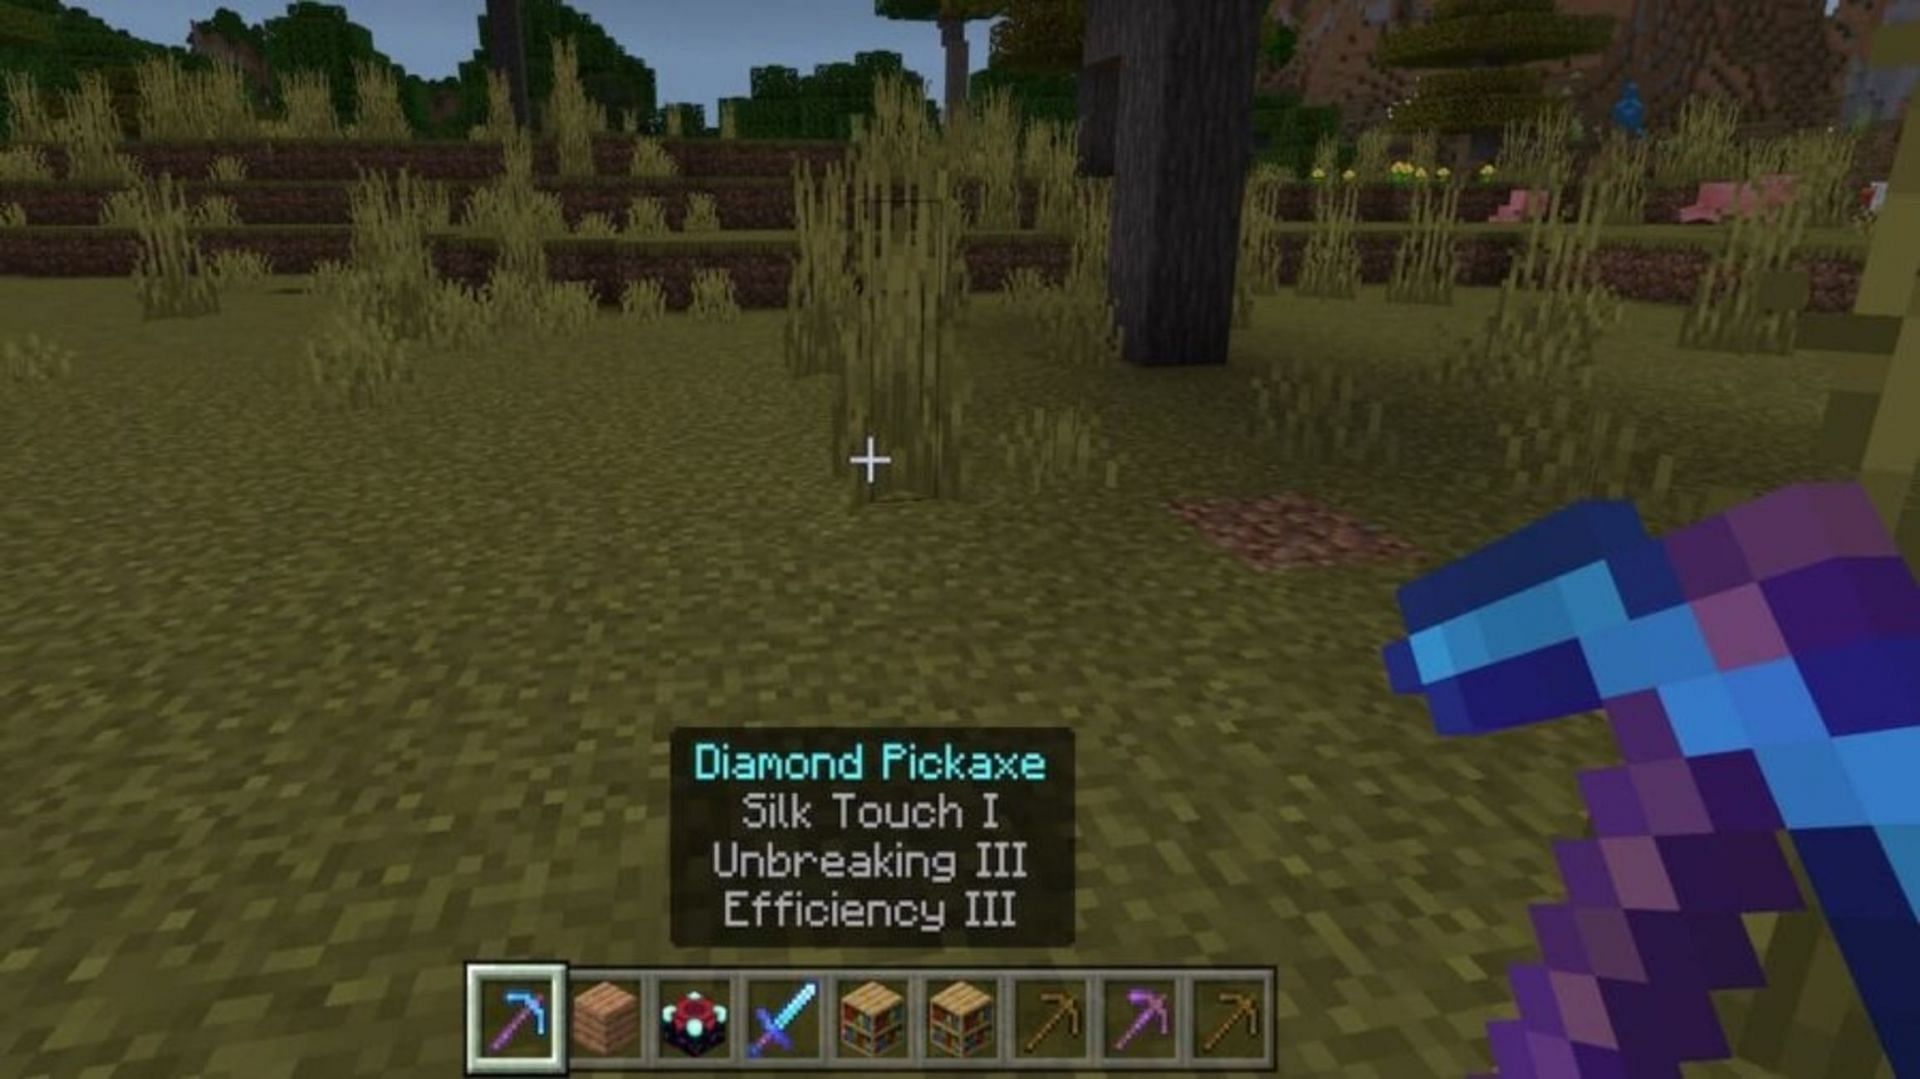 Players will need a Silk Touch tool to collect coral safely (Image via Mojang)